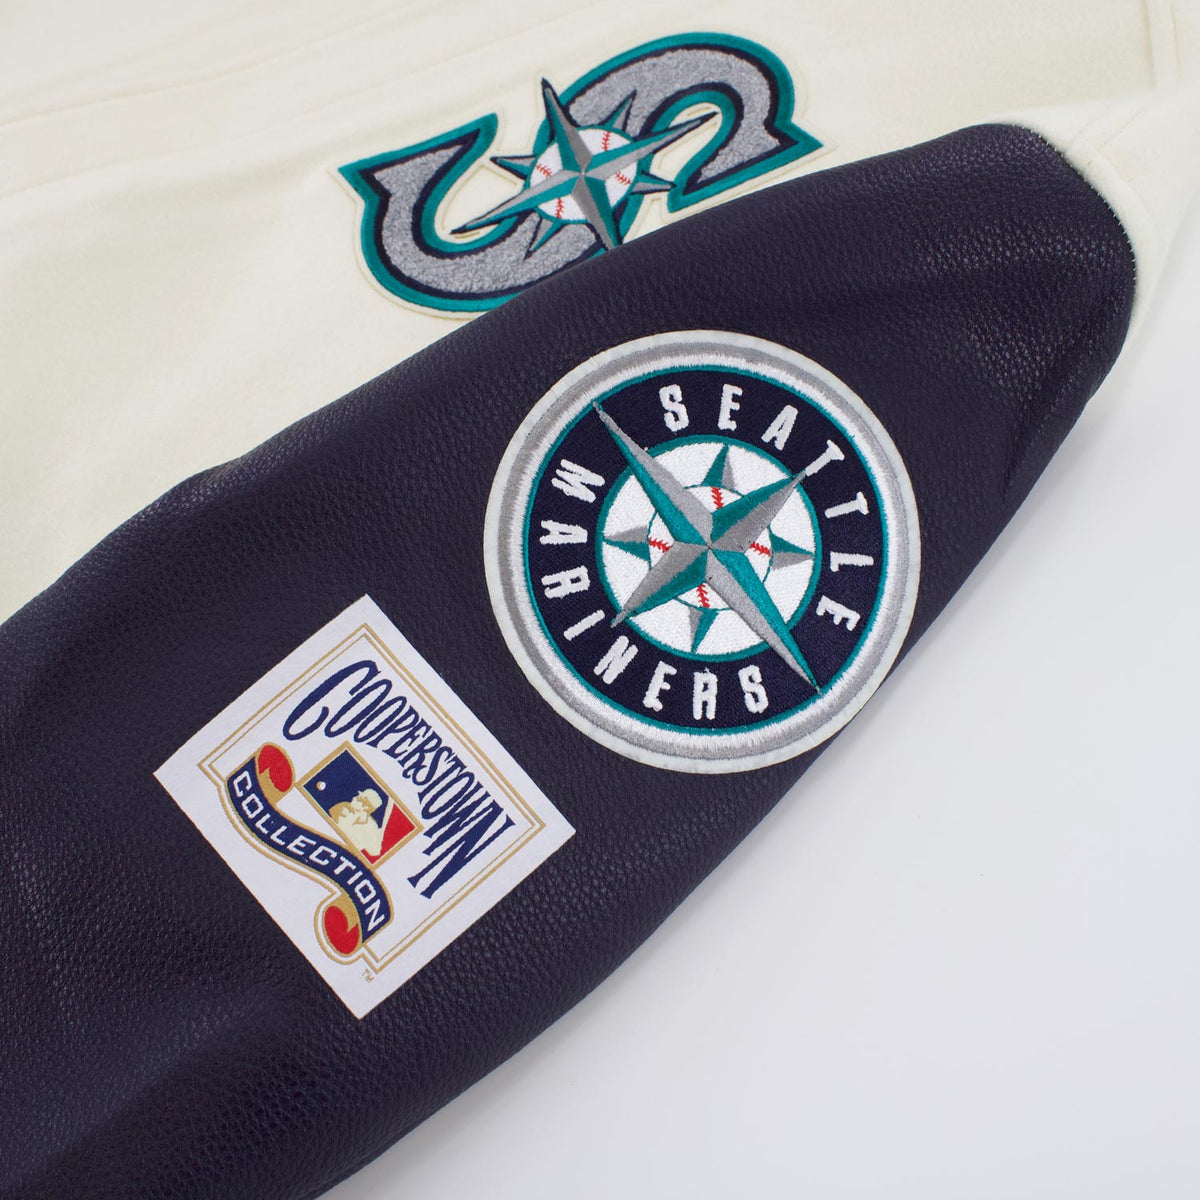 Seattle Mariners Bright Lights Satin Jacket – Simply Seattle